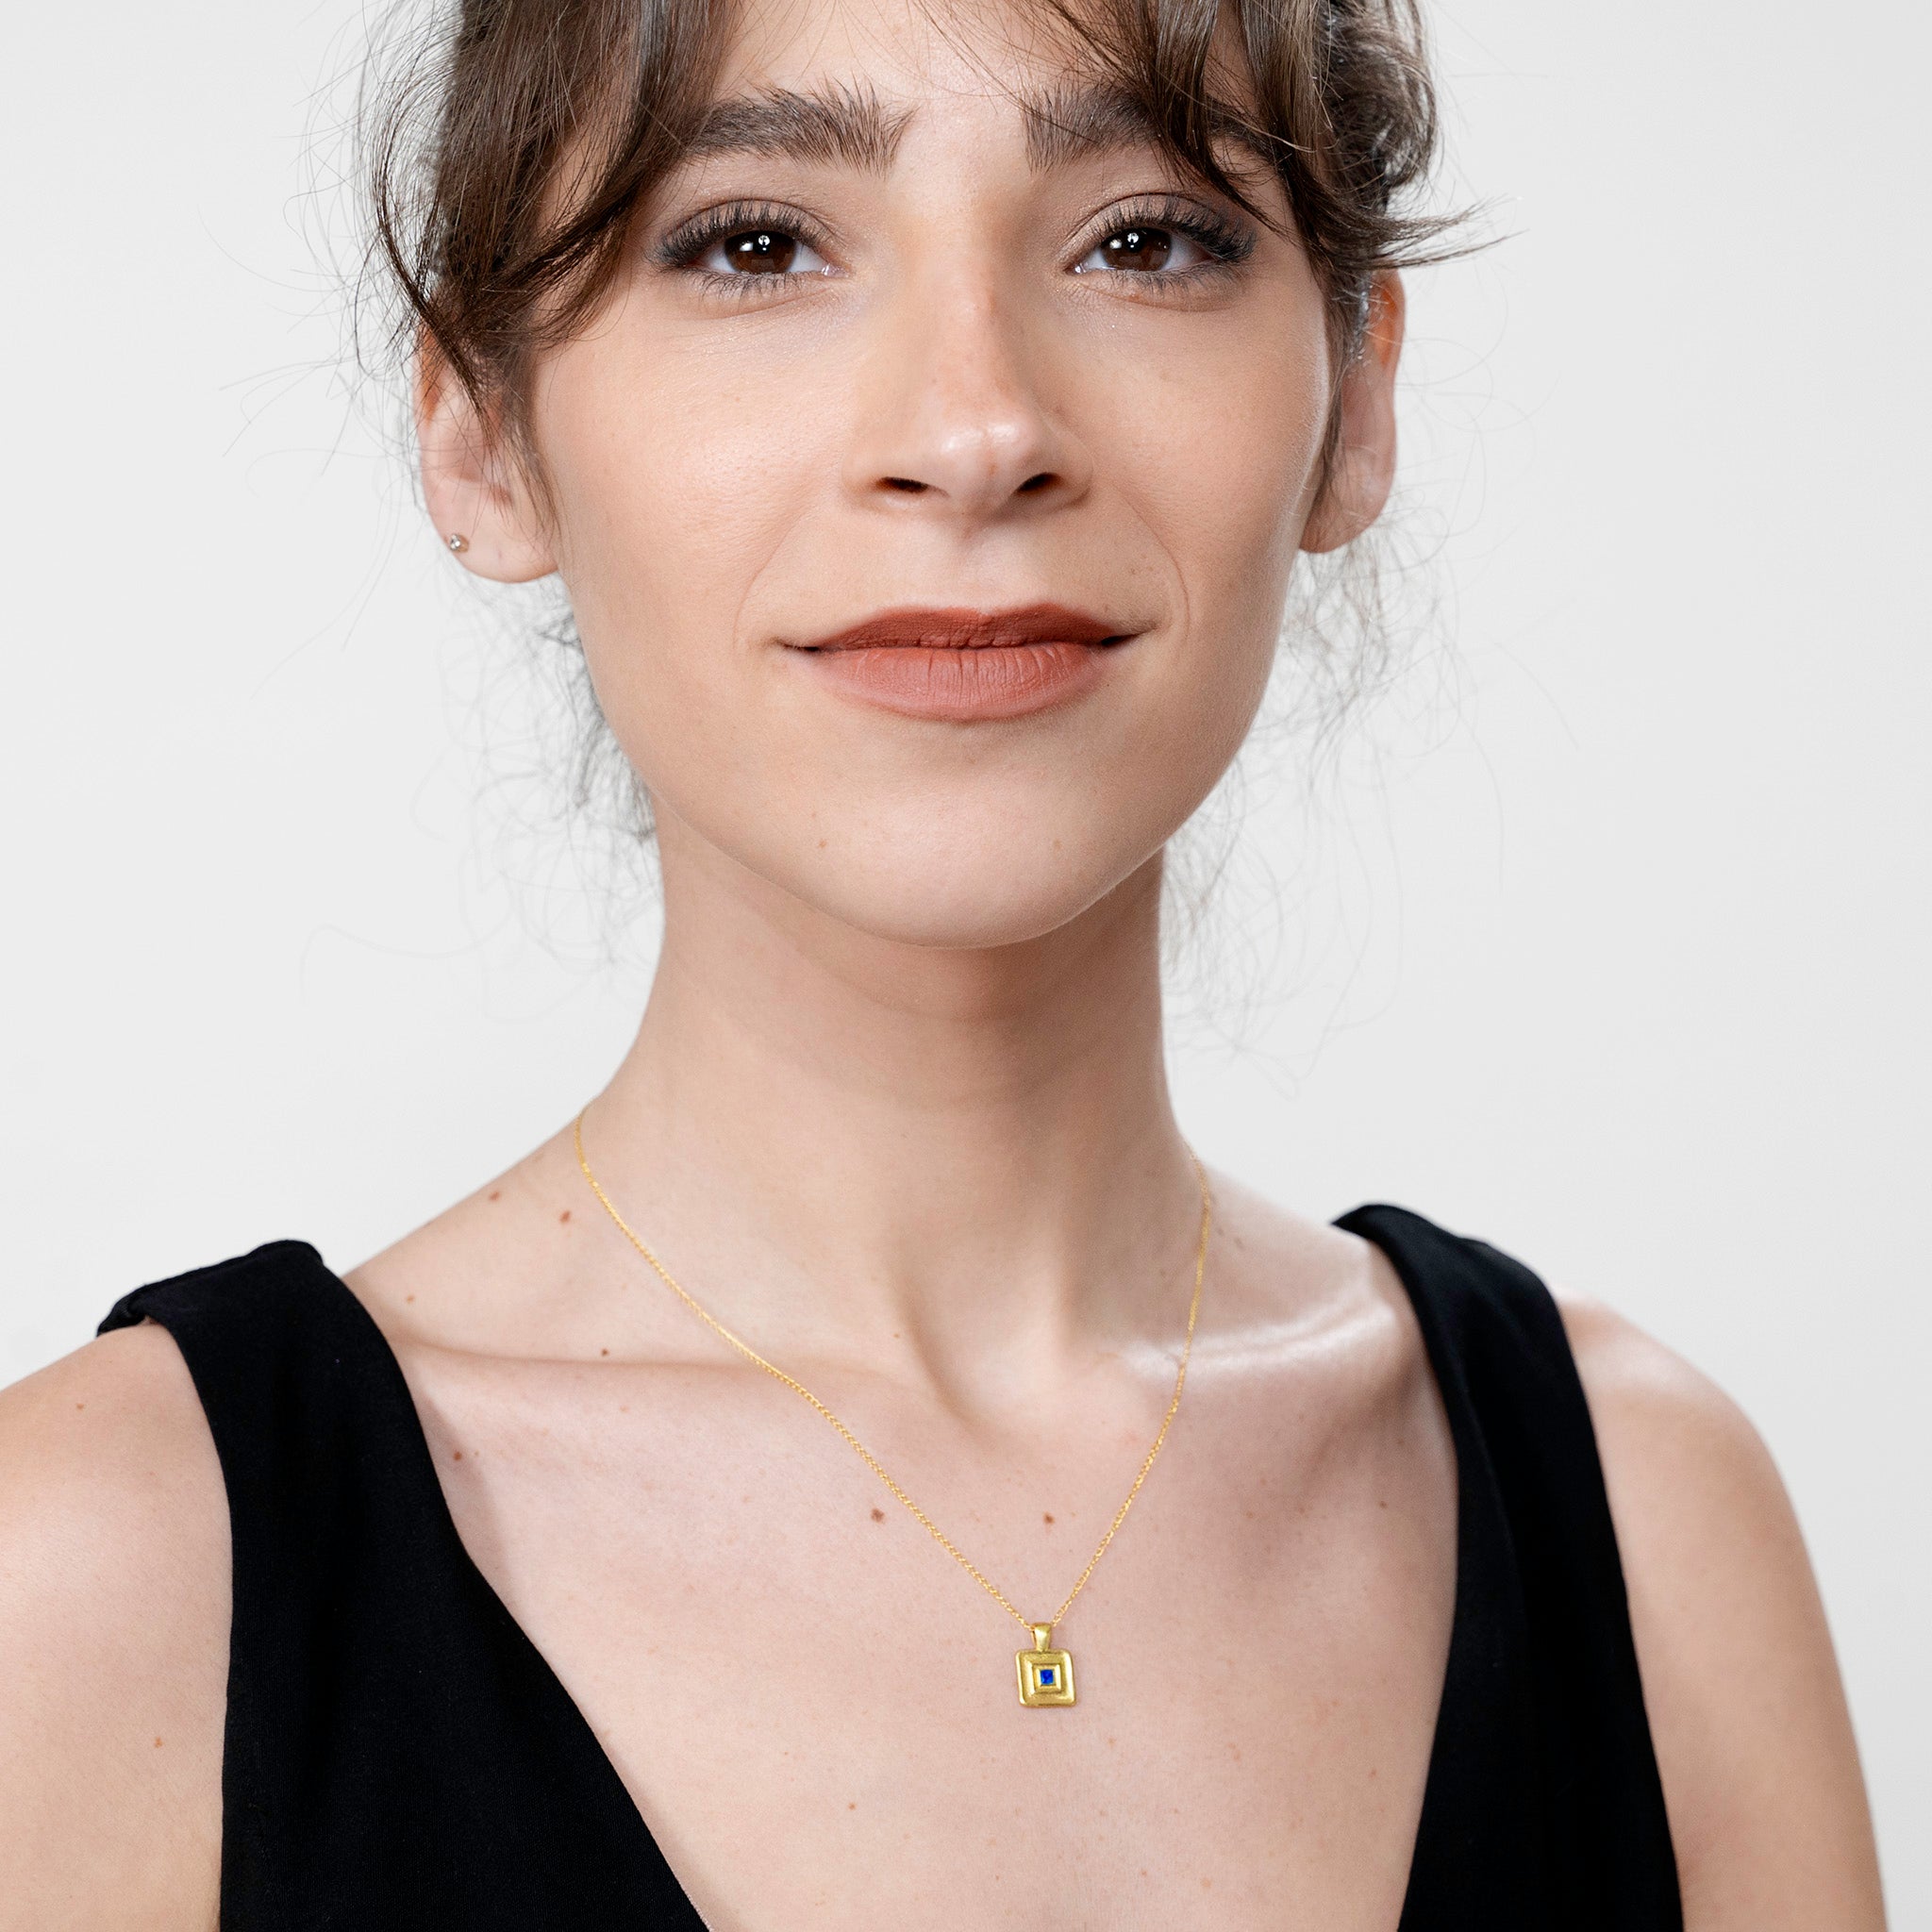 Model showcases the Pharaohs II handmade square gold pendant, centered with a square Sapphire gemstone, a piece inspired by the regal adornments of Egypt's ancient rulers.